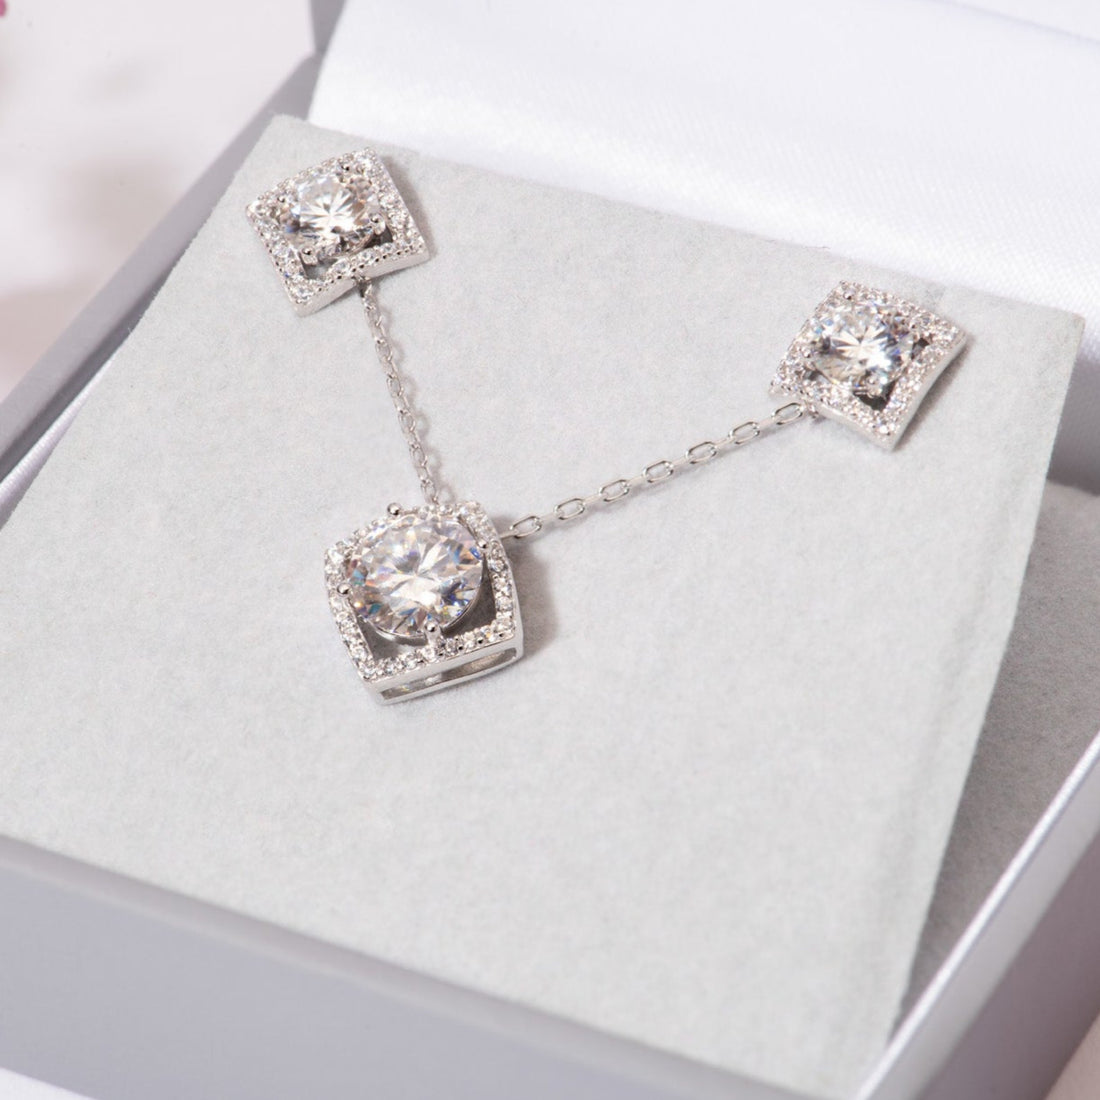 1 carat Moissanite Diamond Necklace and Earrings